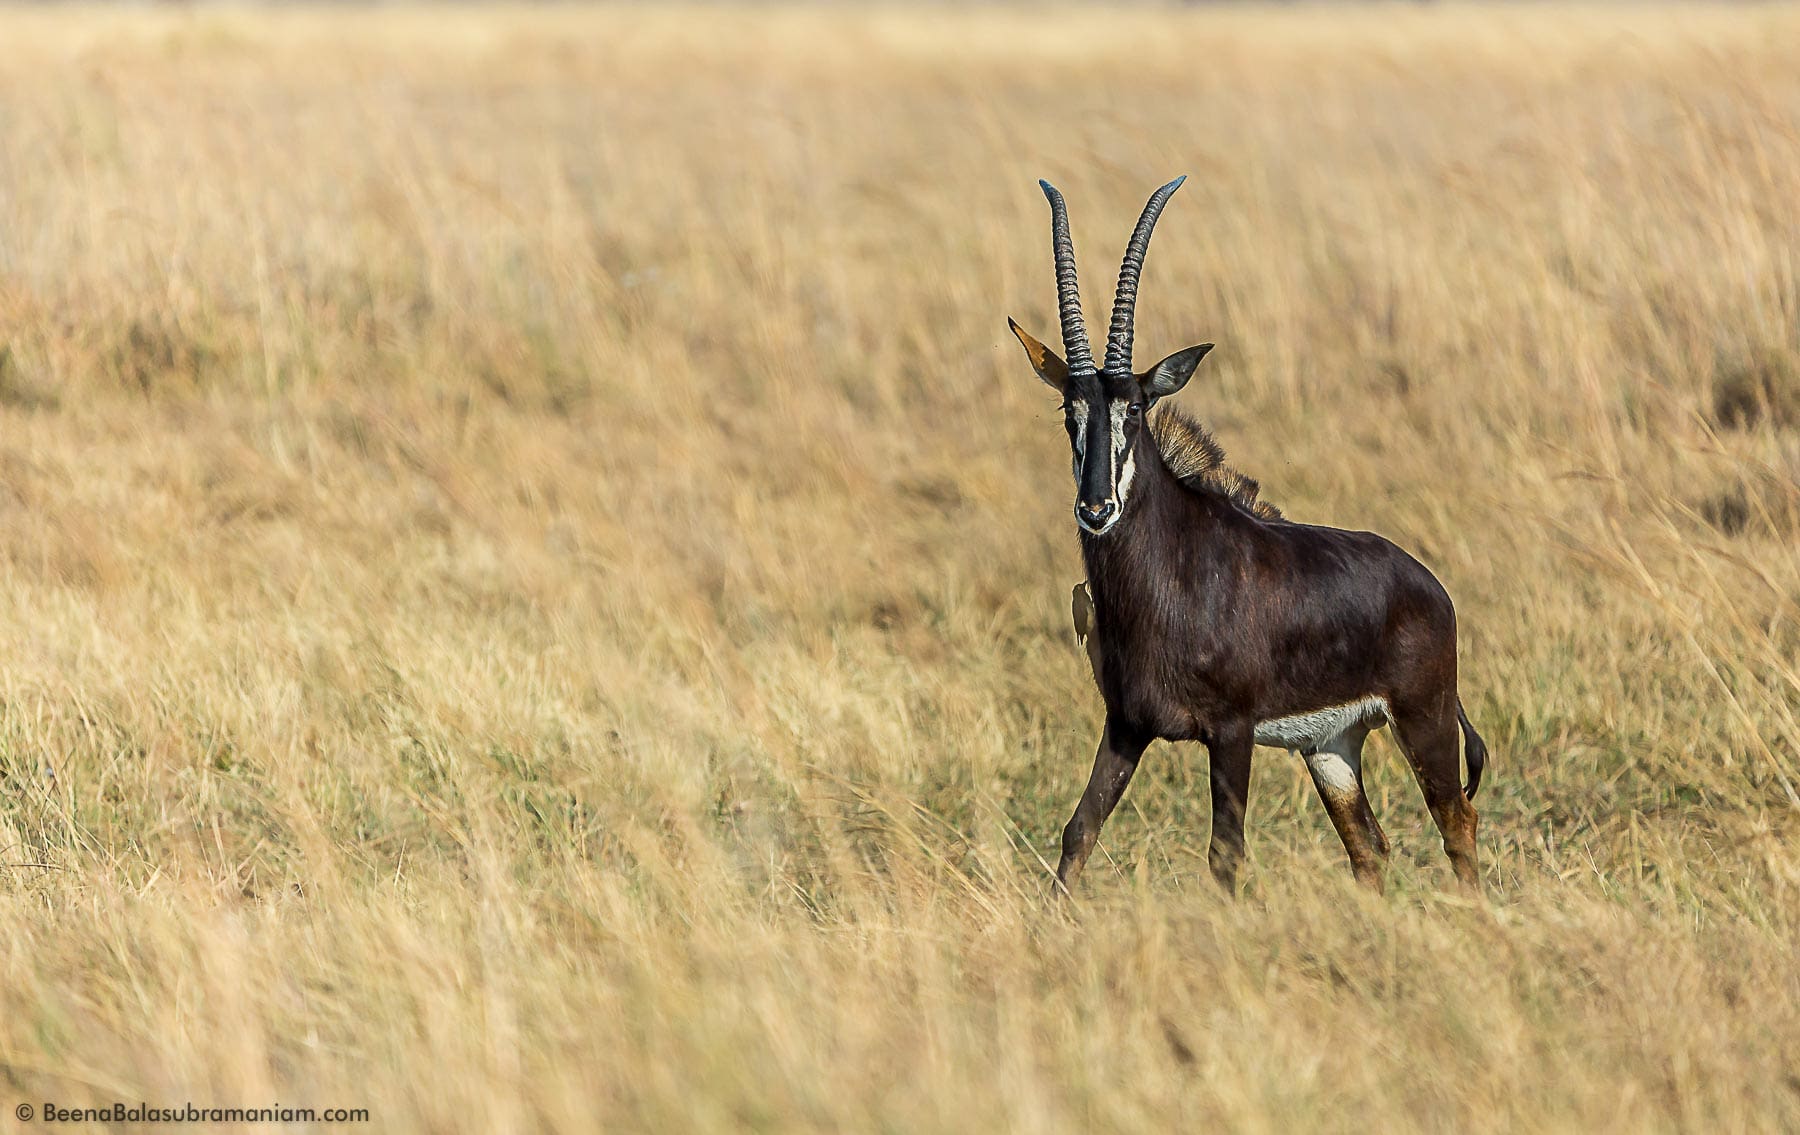 The sable antelope (Hippotragus niger) is an antelope which inhabits wooded savannah in Southern Africa.